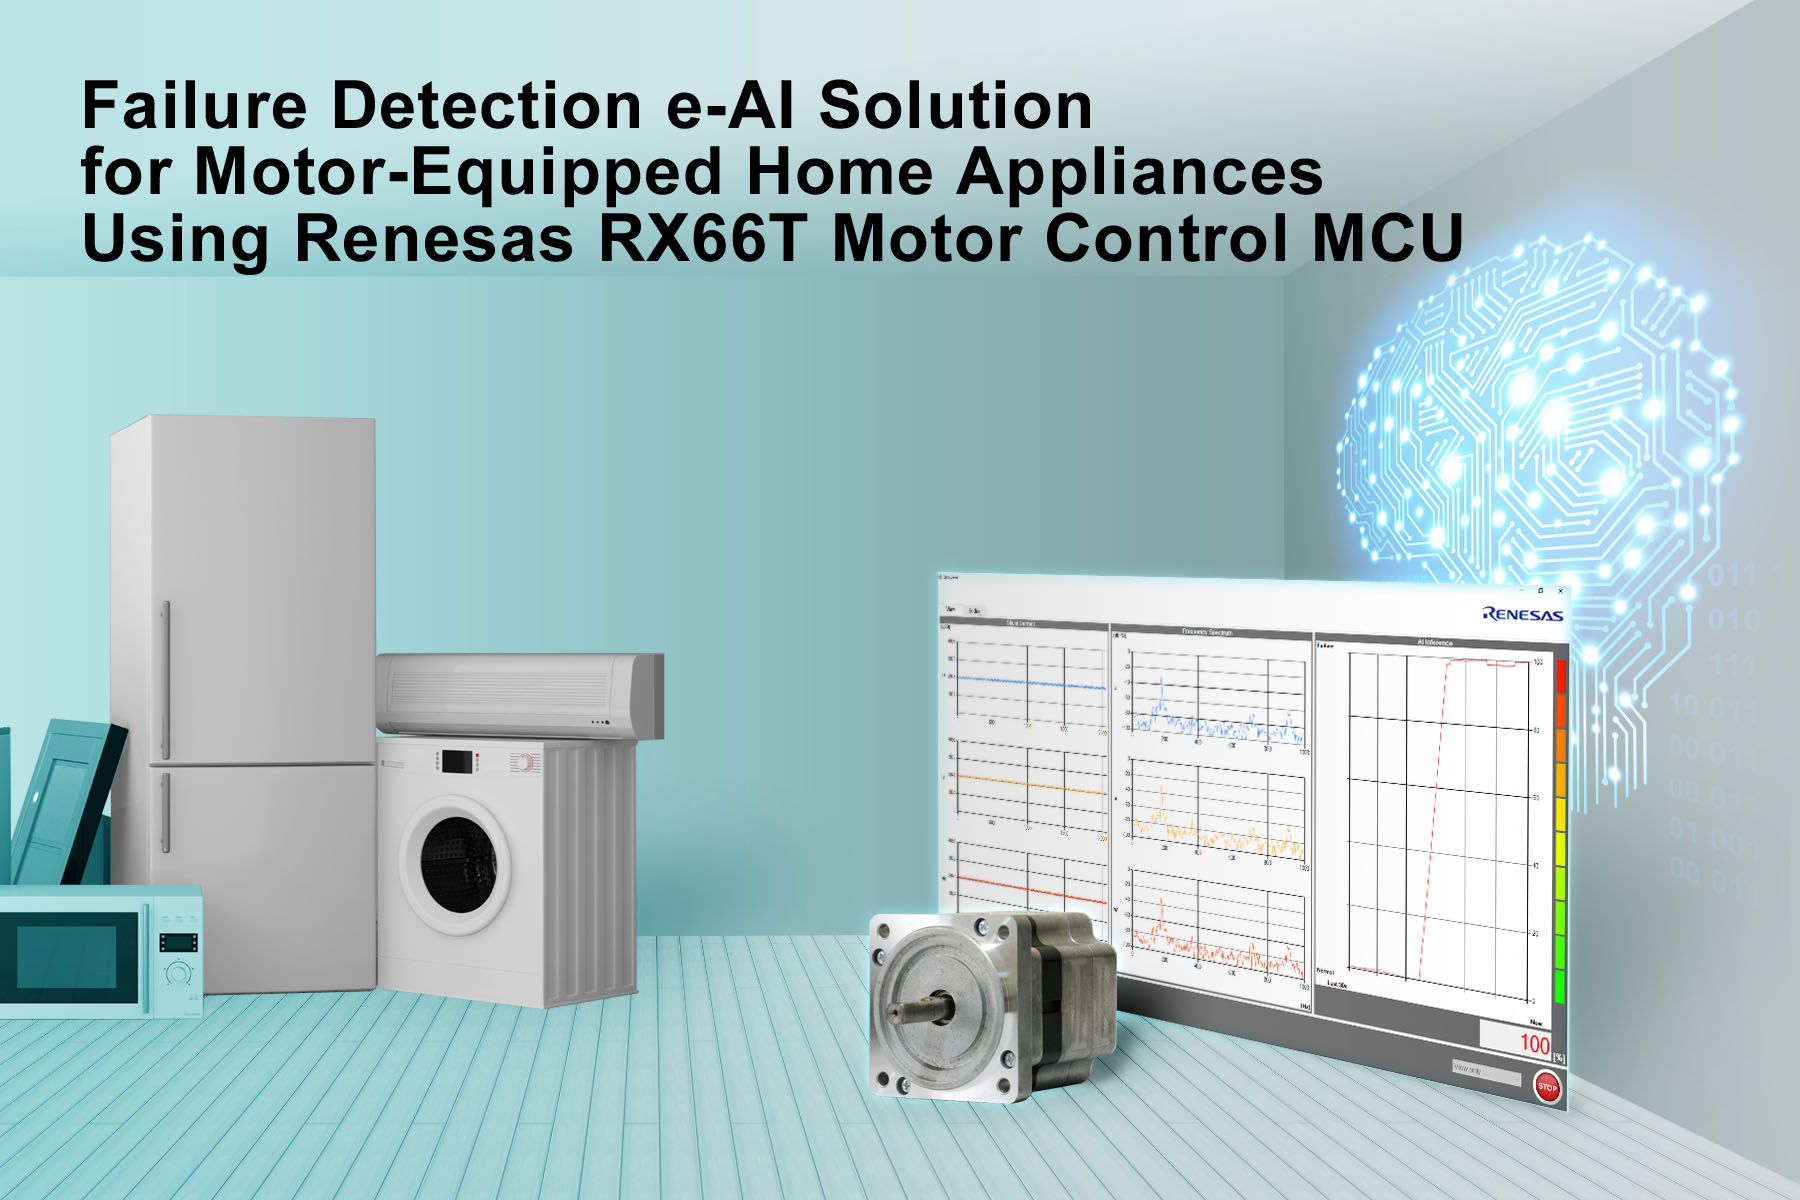 Failure detection e-AI solution for motor-equipped home appliances featuring the Renesas RX66T 32-bit microcontroller